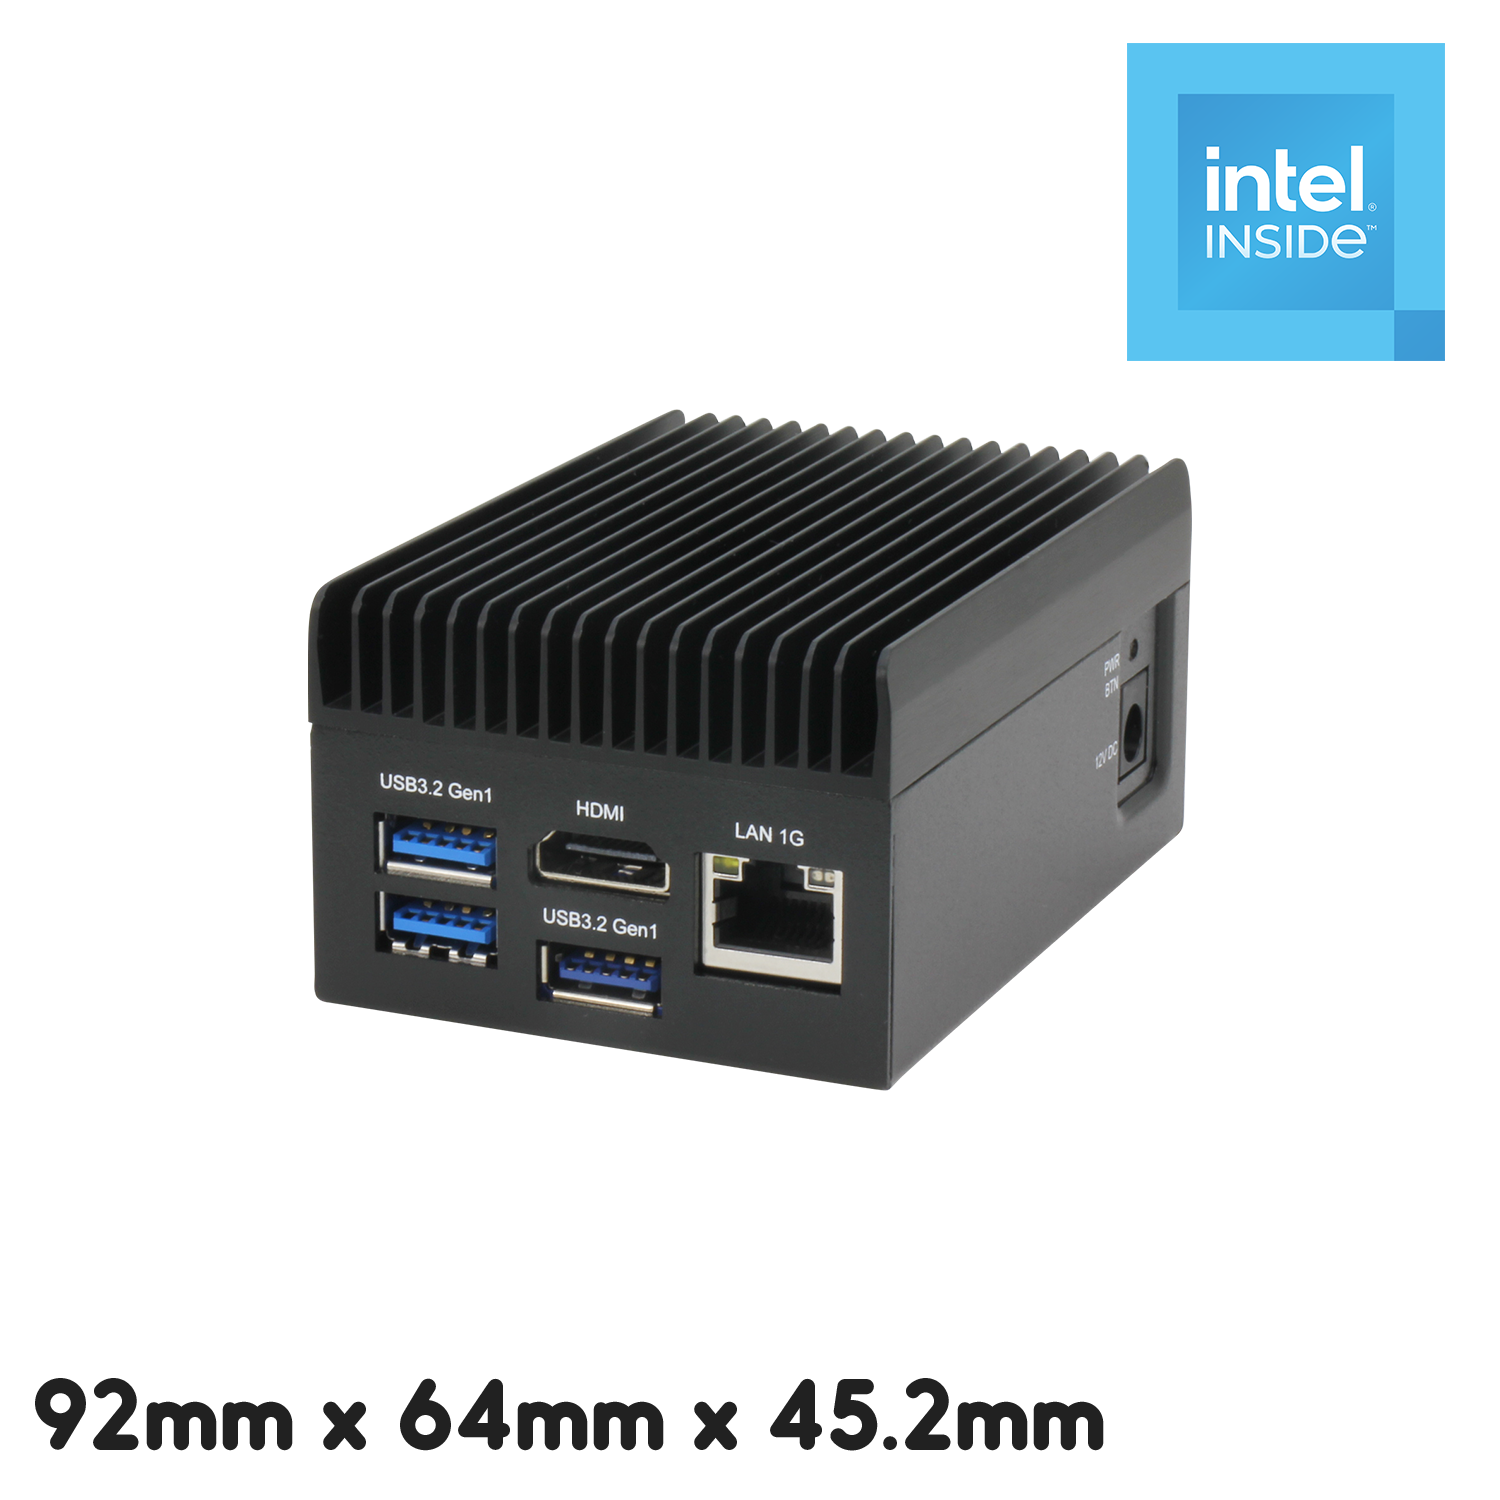 UP 7000 Edge System, front view, with 3x USB 3.2 Gen 1 ports, 1x HDMI, 1x LAN 1G